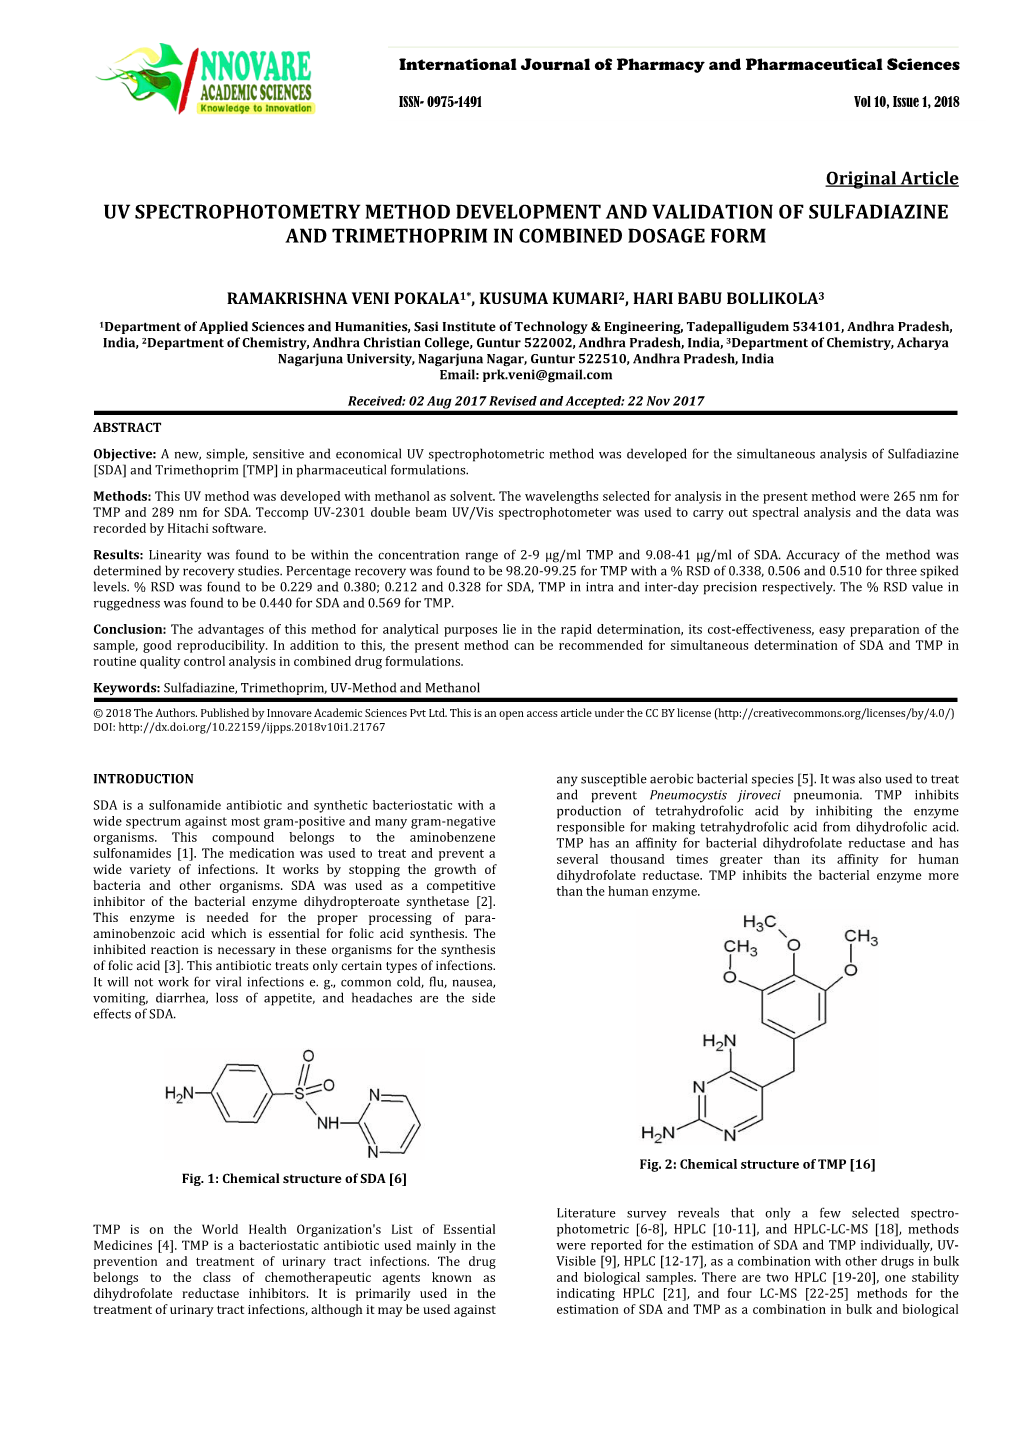 Uv Spectrophotometry Method Development and Validation of Sulfadiazine and Trimethoprim in Combined Dosage Form